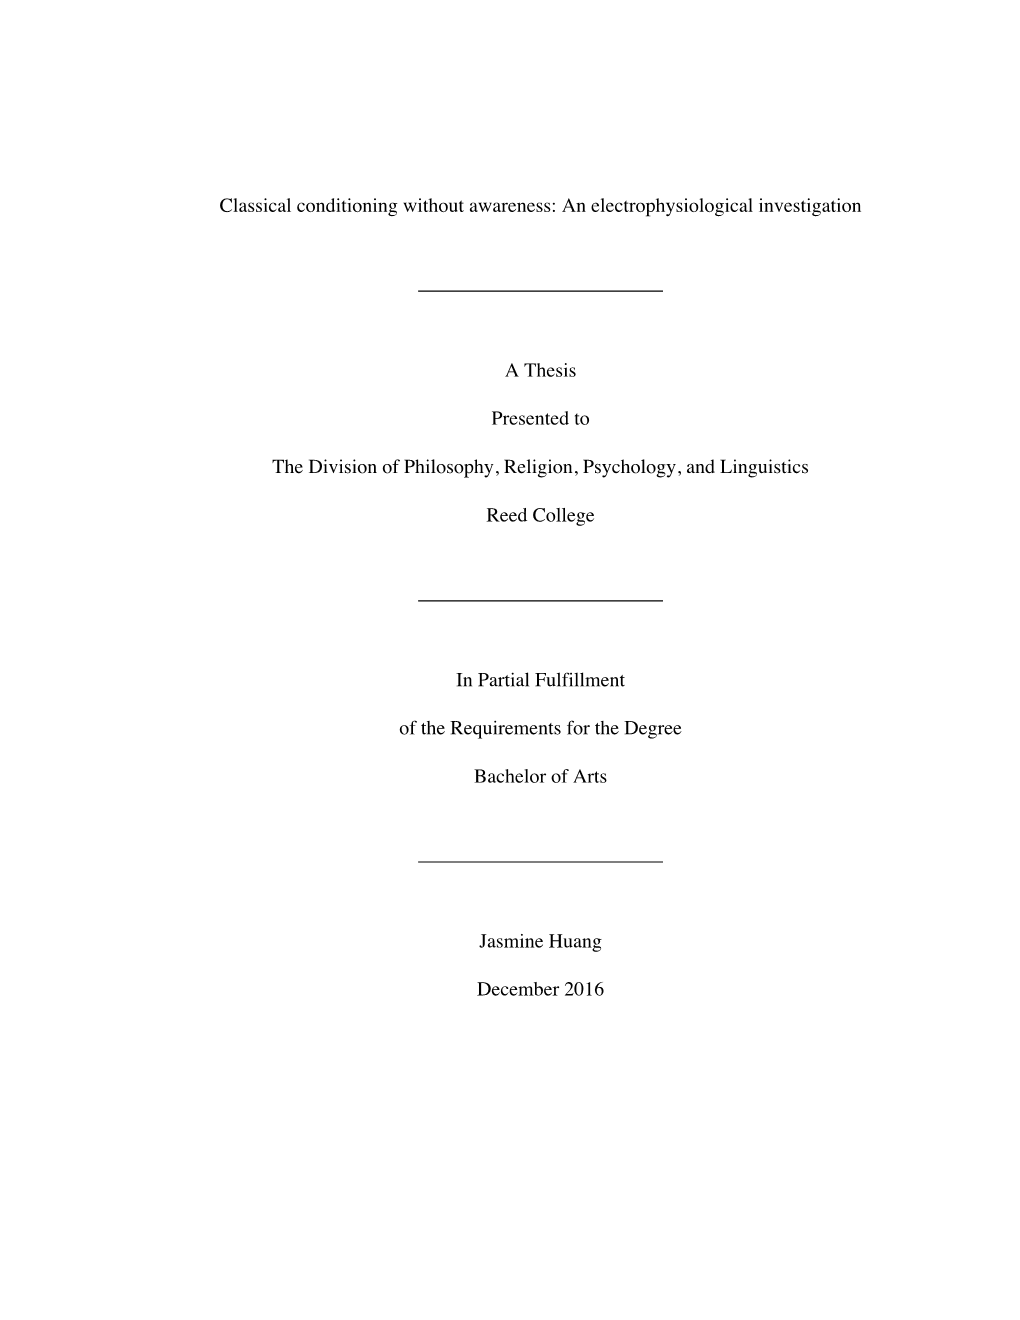 Classical Conditioning Without Awareness: an Electrophysiological Investigation